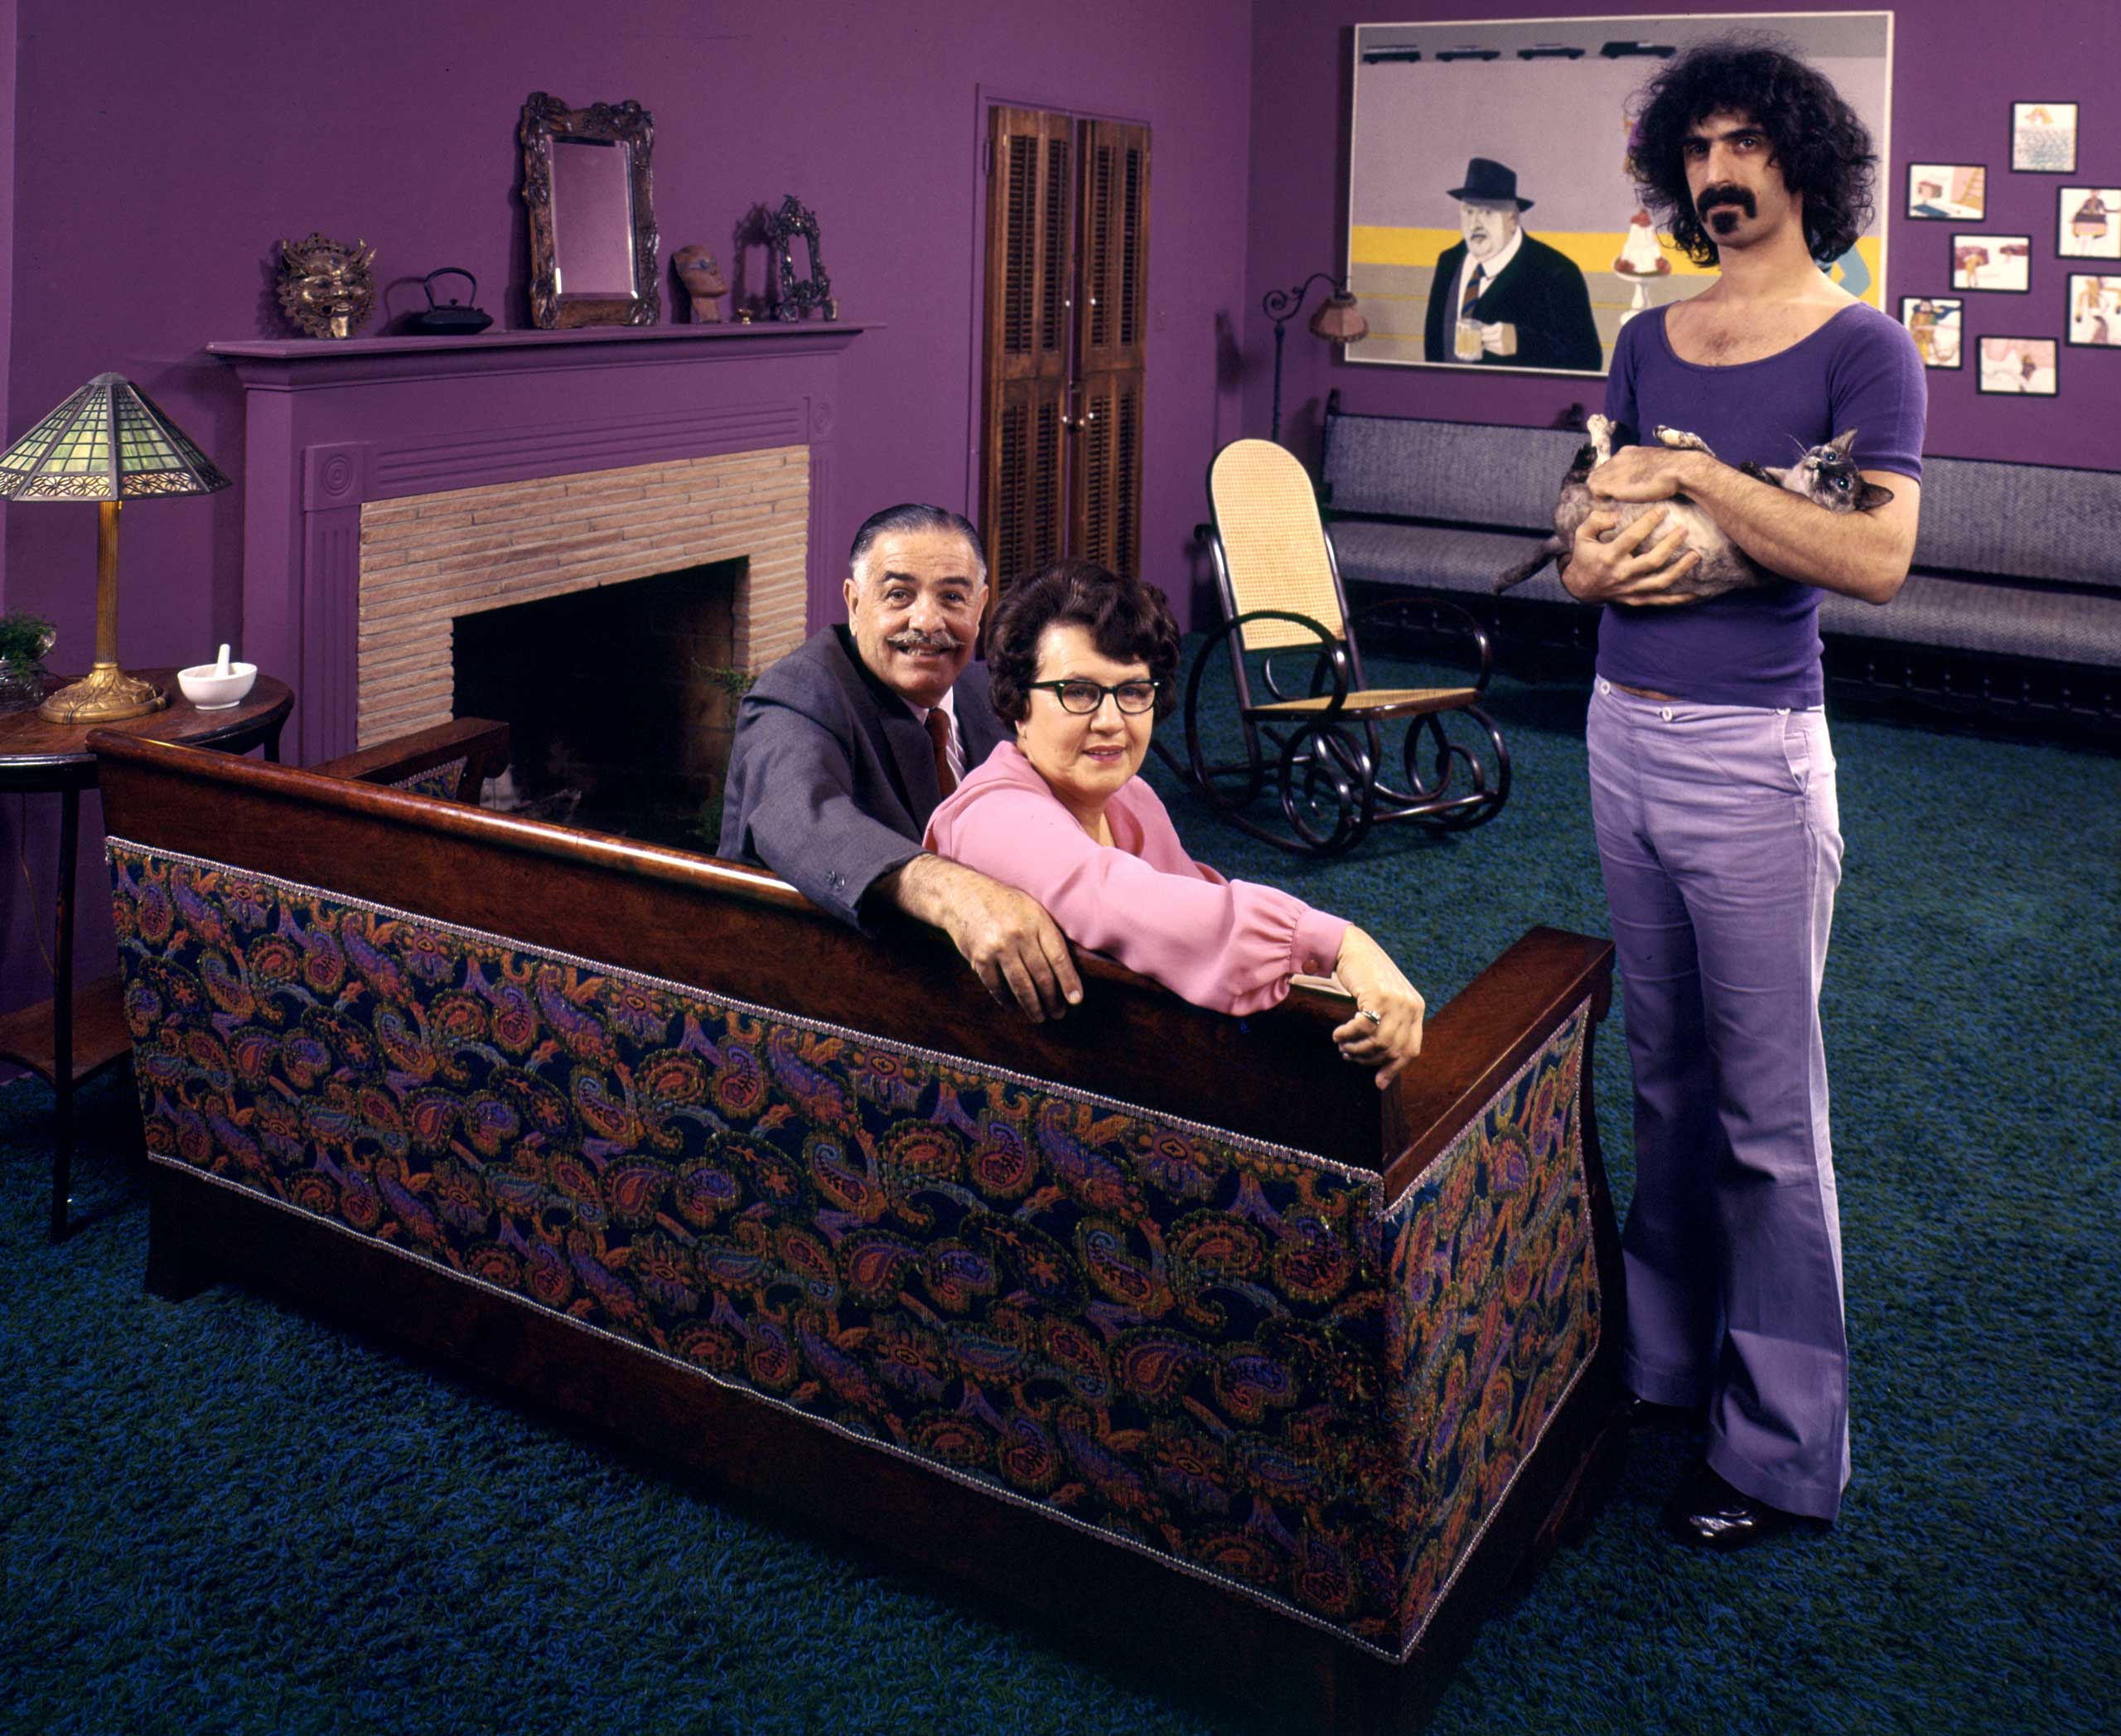 Frank Zappa in his Los Angeles home with his dad, Francis, his mom, Rosemarie, and his cat in 1970.